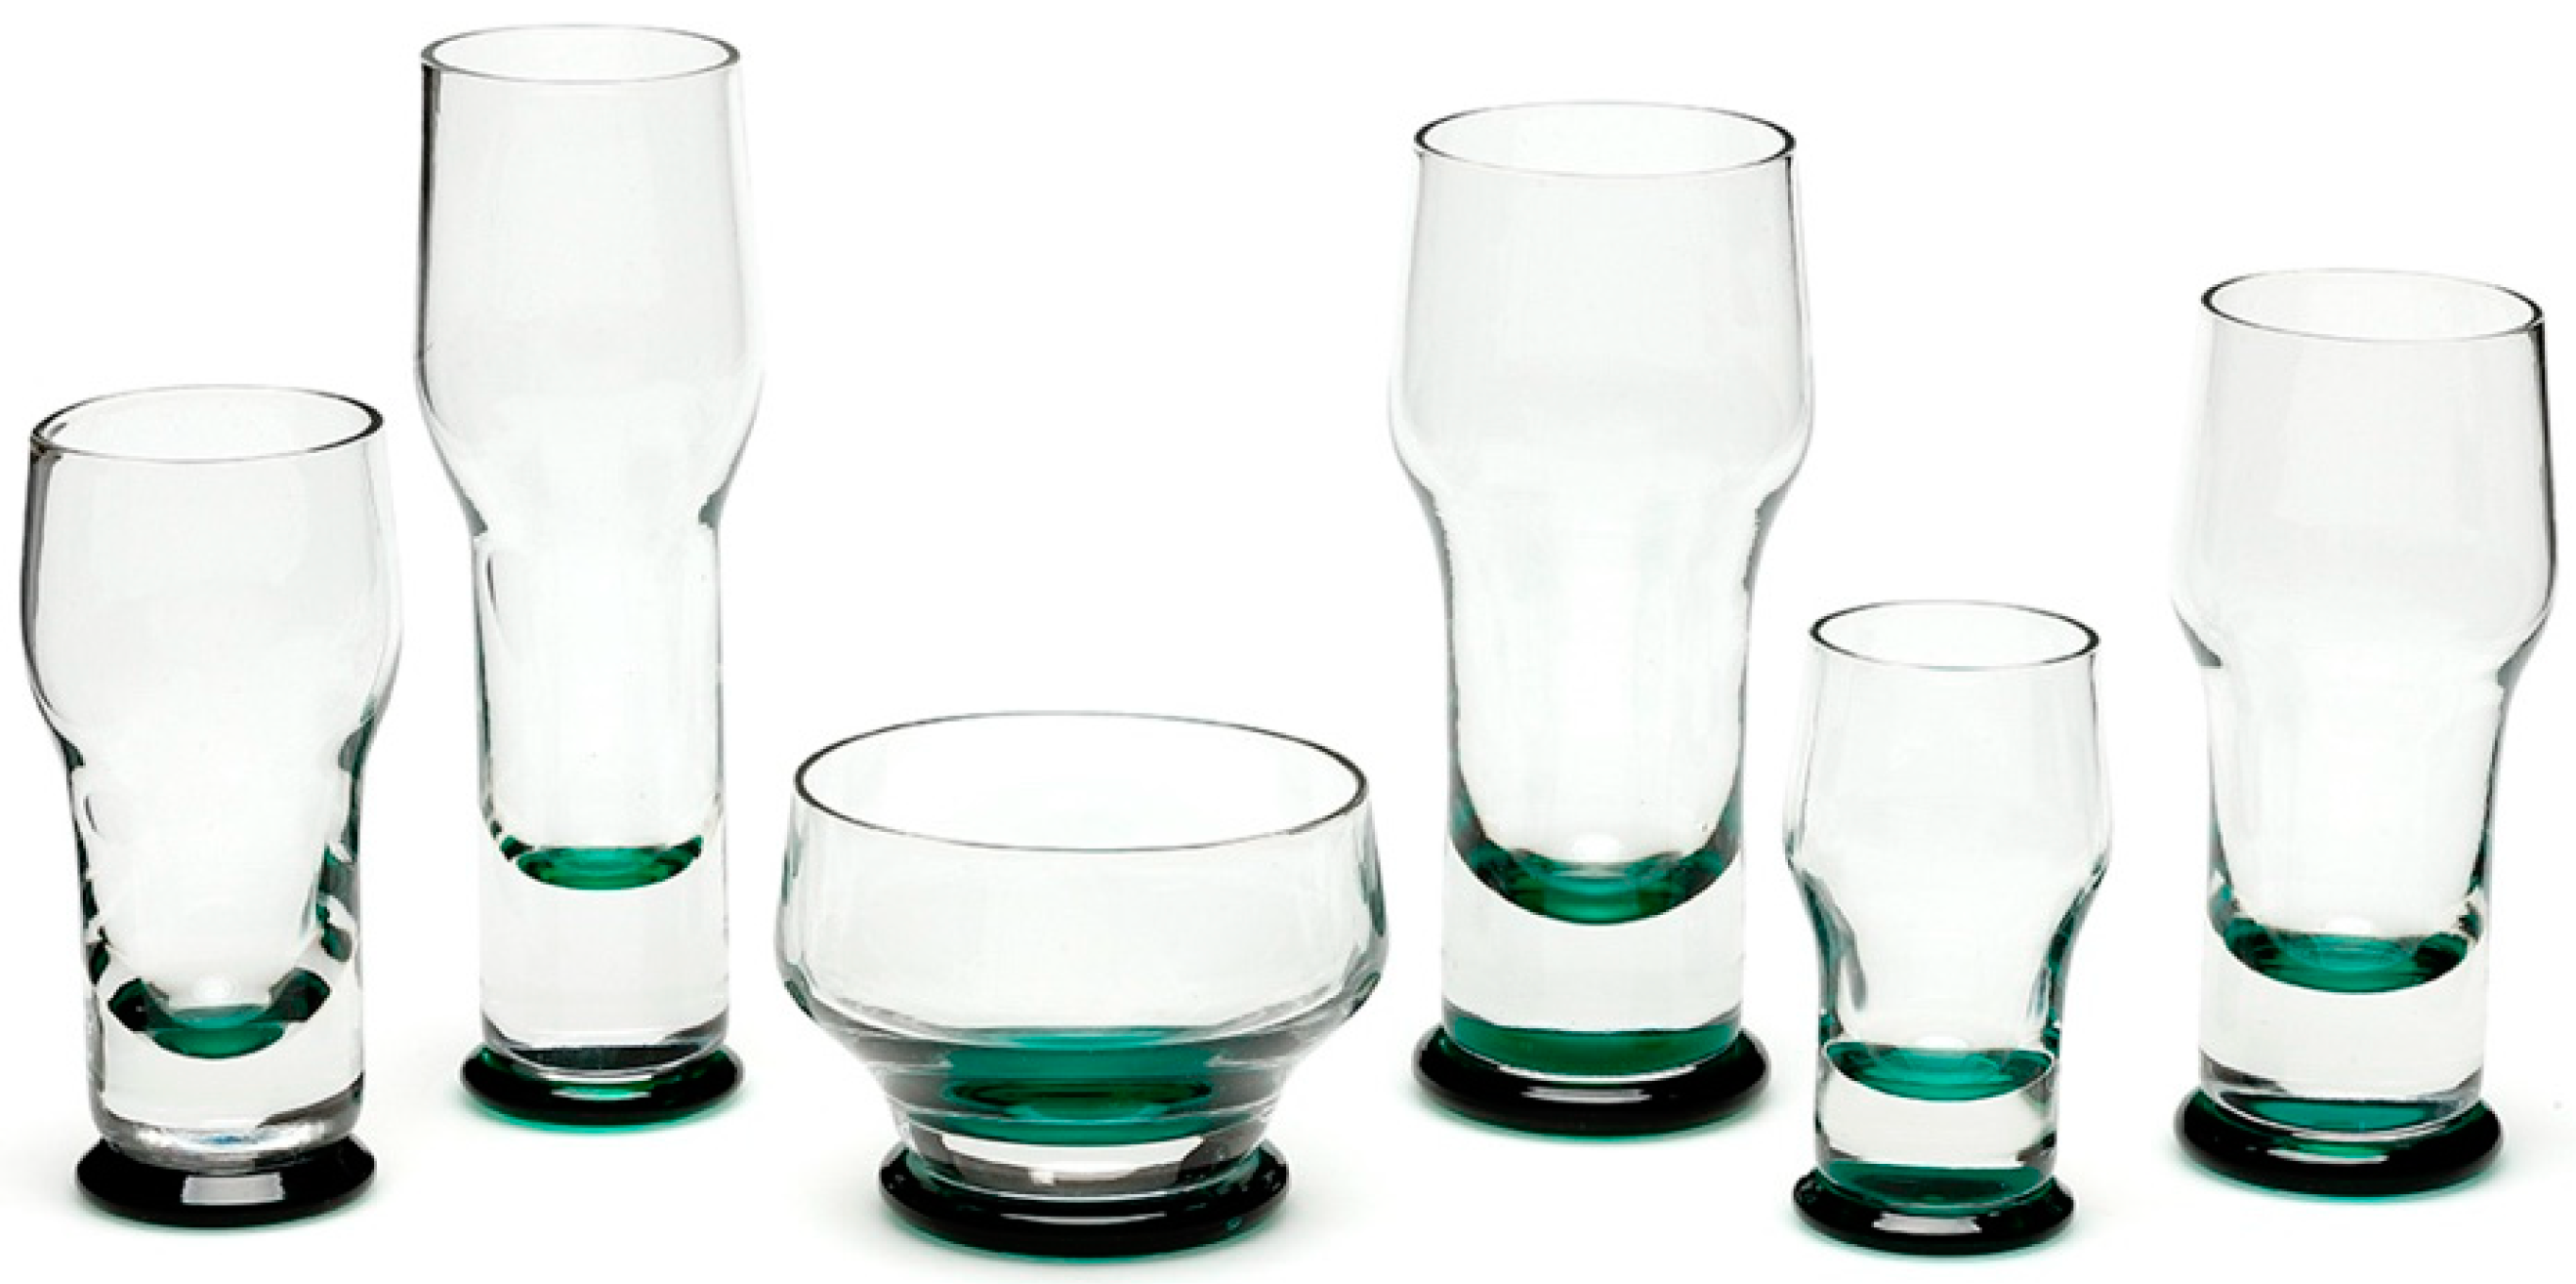 Design Glass Objects 